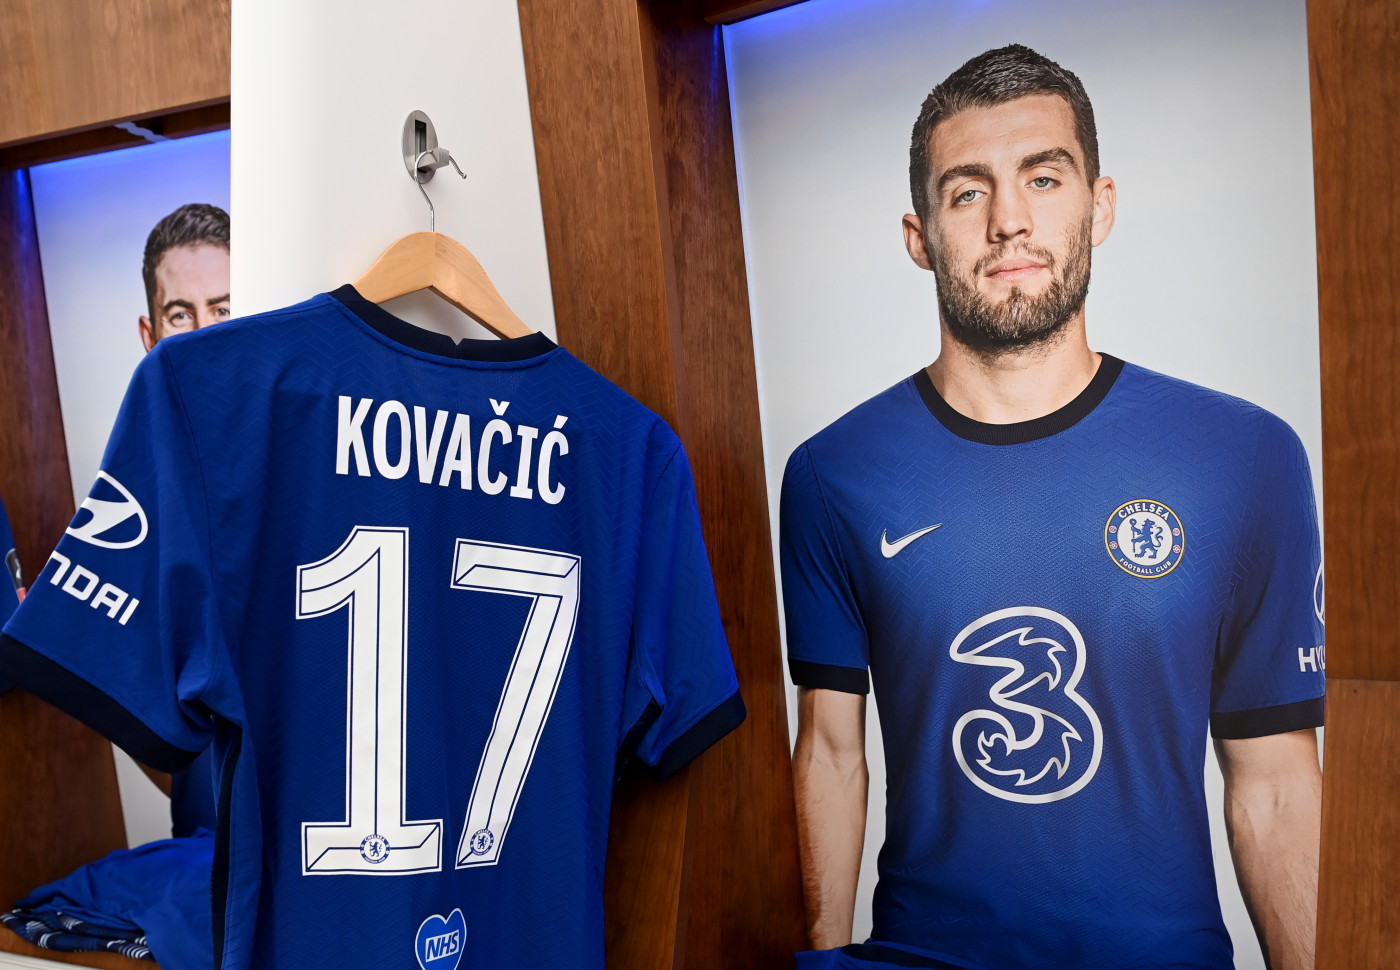 2020/21 Squad Numbers Confirmed